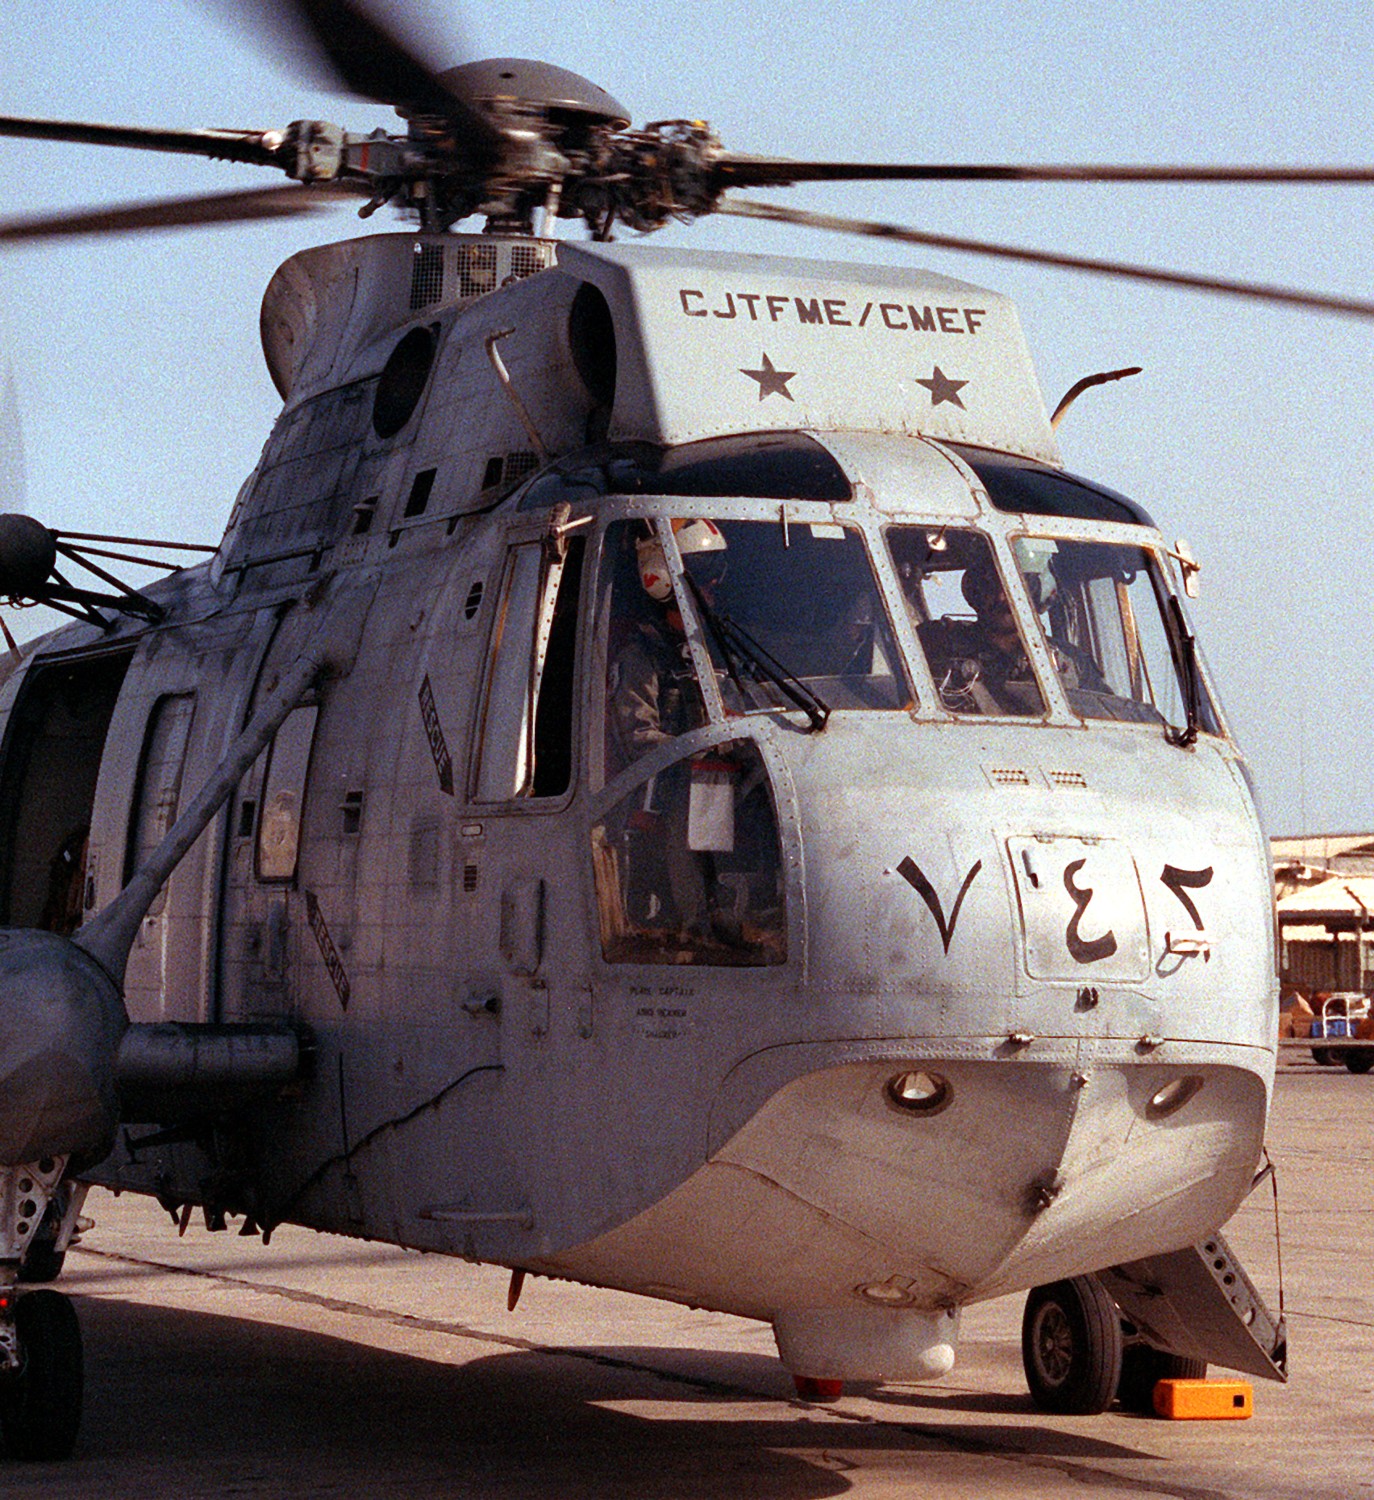 hc-2 fleet angels helicopter combat support squadron us navy sh-3g sea king 32